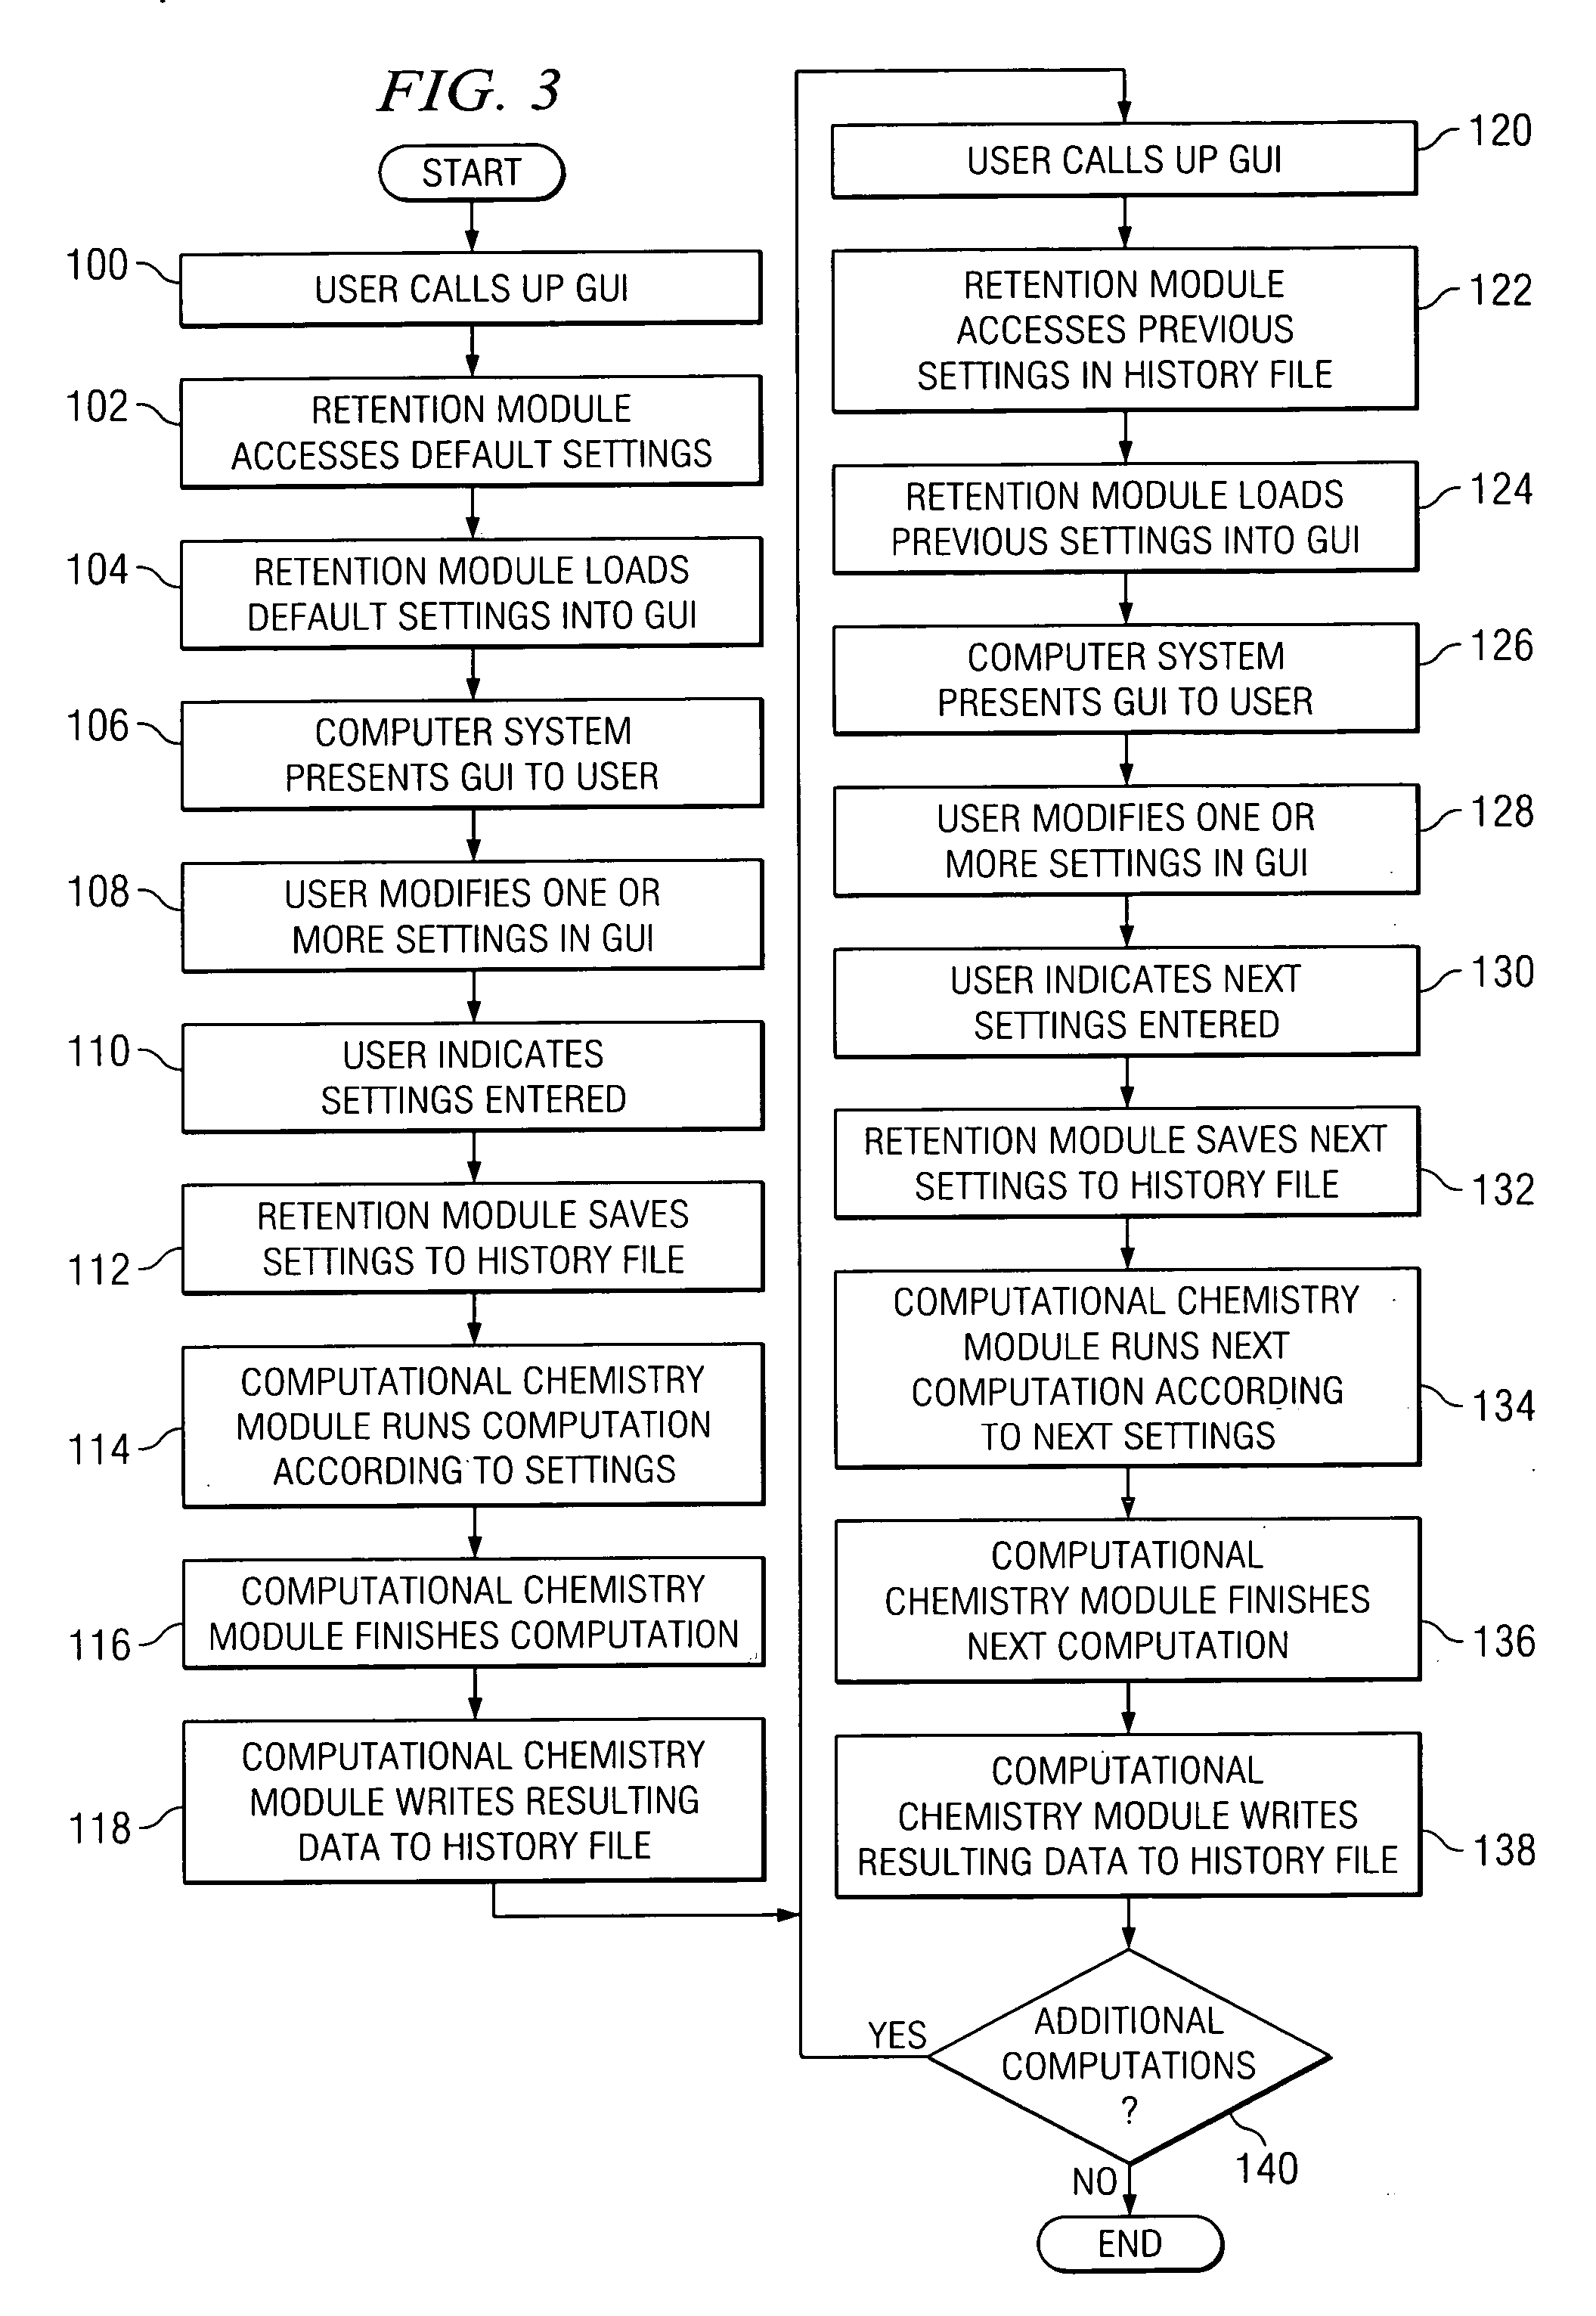 Automatically retaining settings of computations on models of molecules for automatic use in subsequent computations